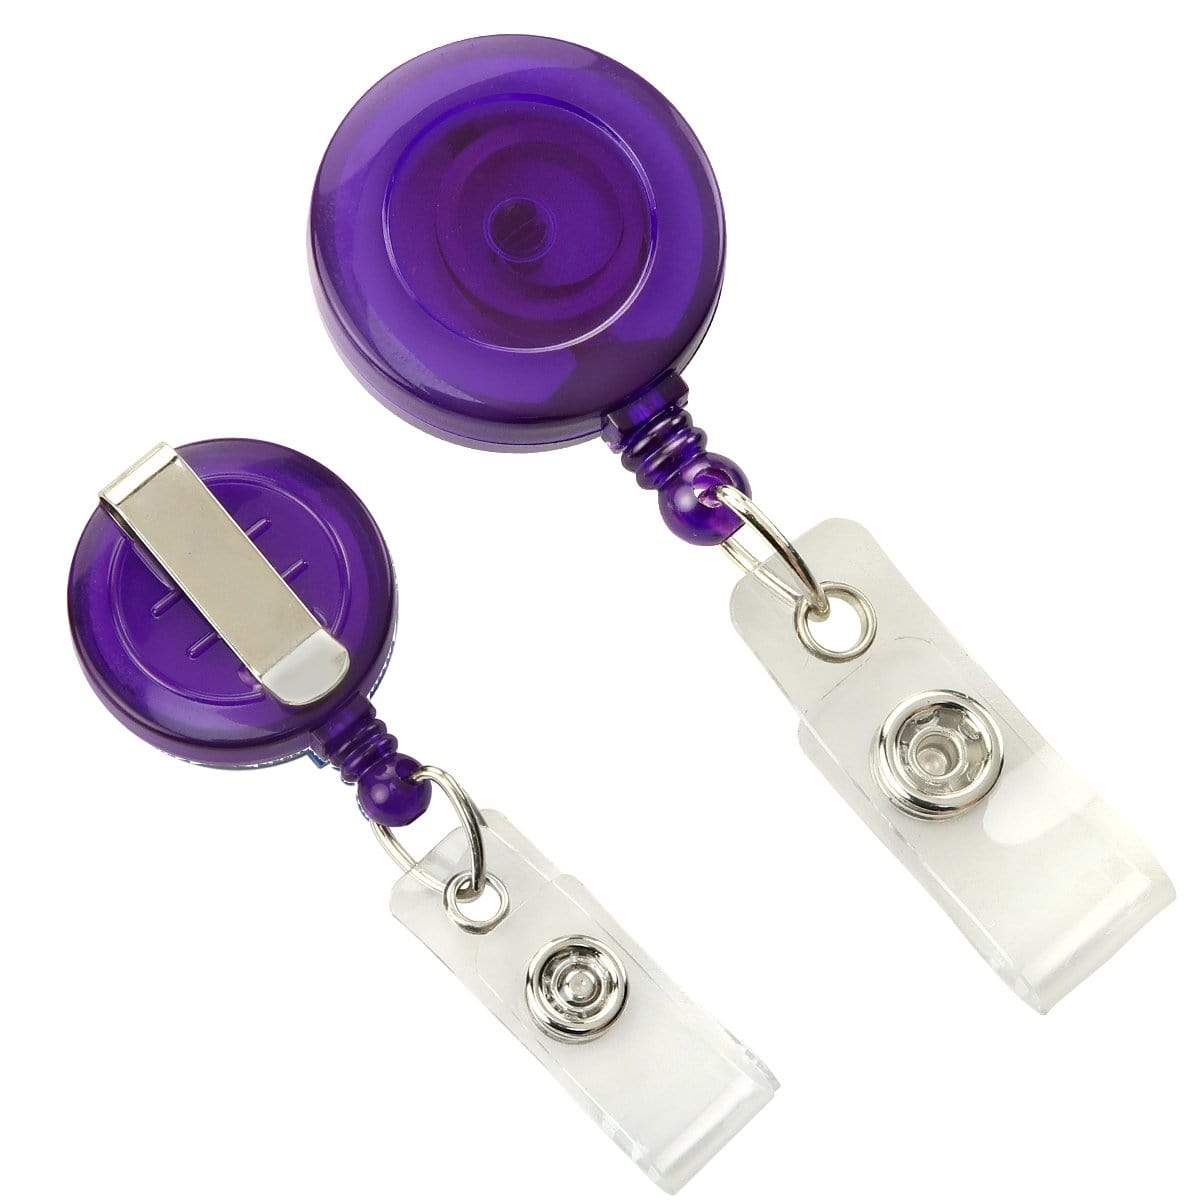 Colorful Badge Reels with Clip and Retractable Cord for IDs and